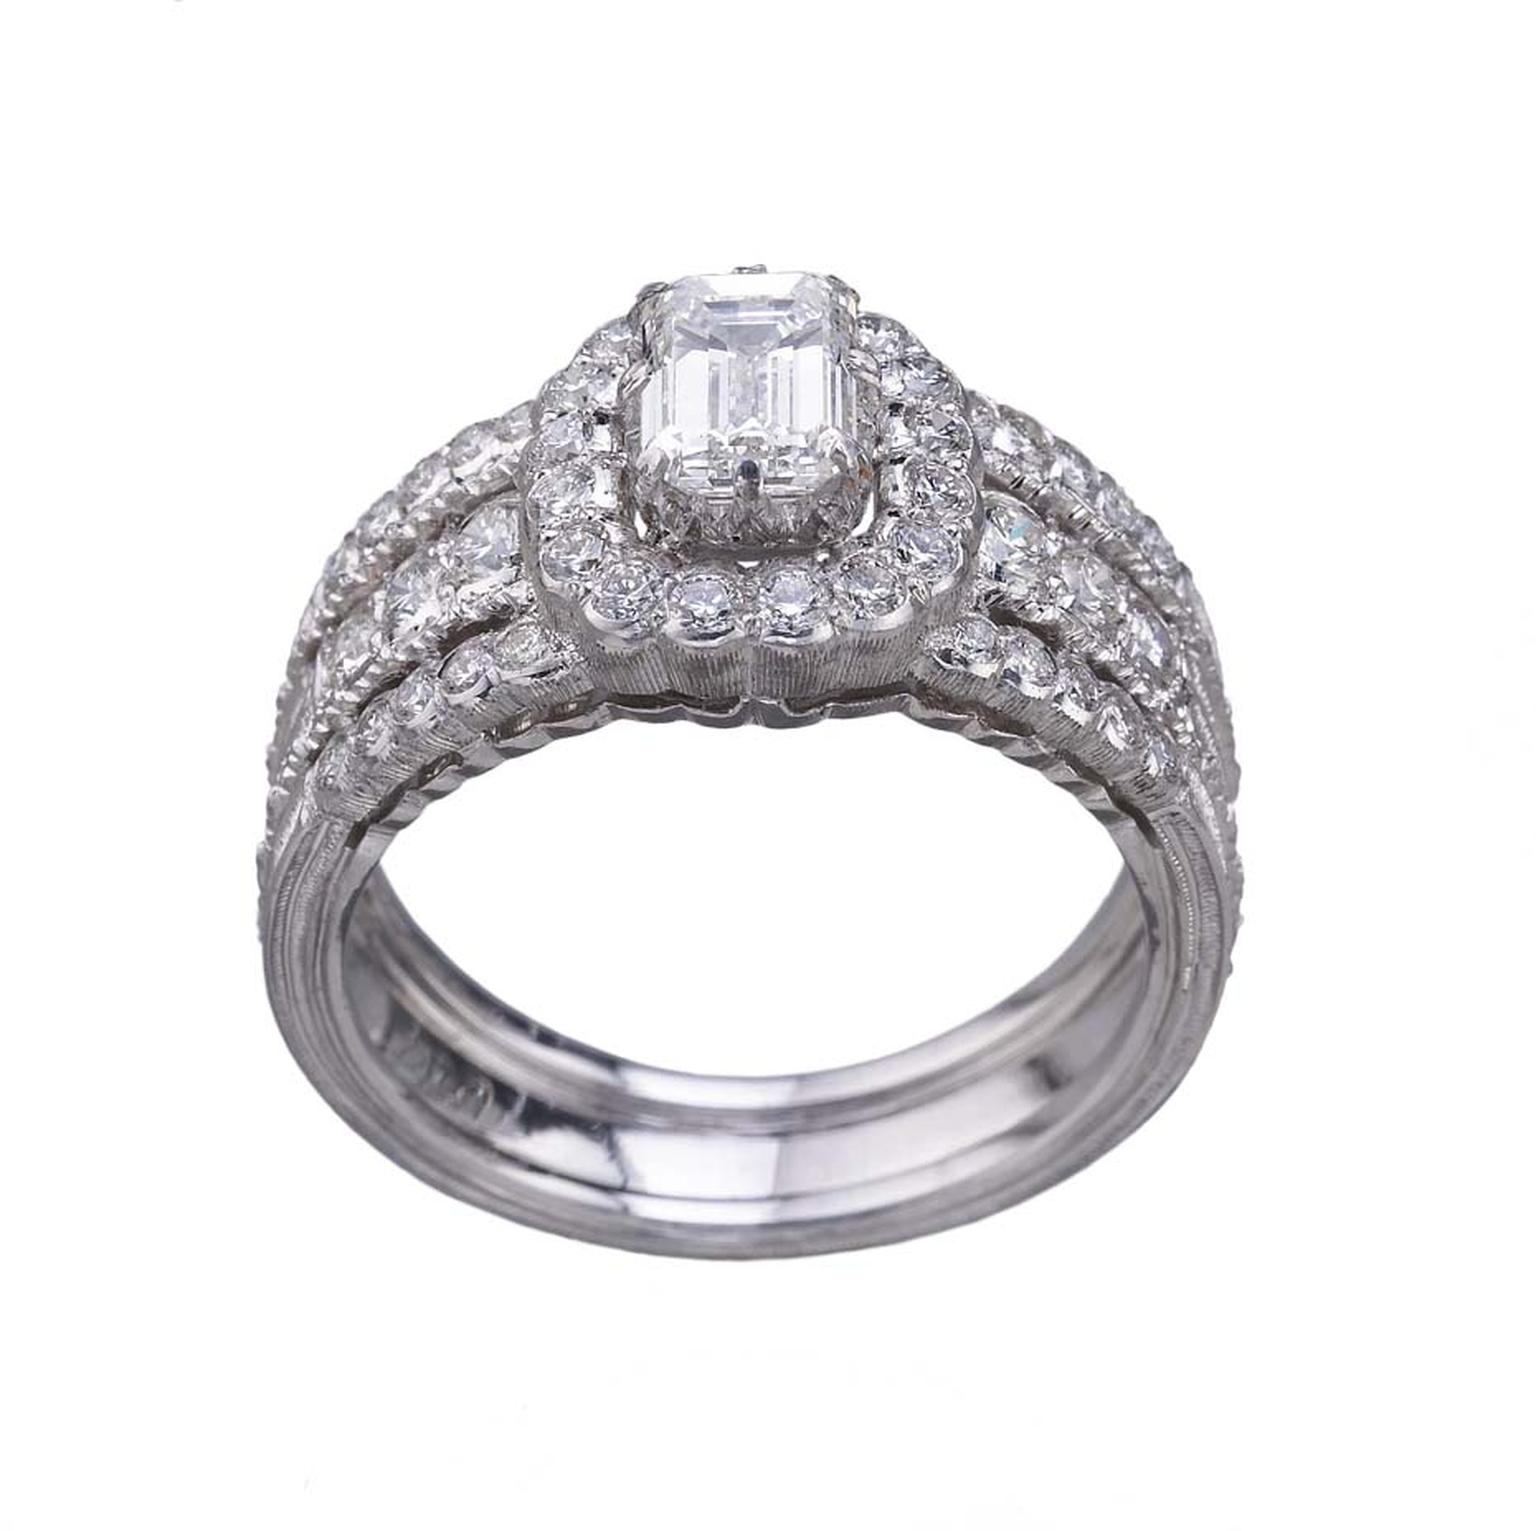 Buccellati Romanza diamond engagement ring - one of eight new designs that make up the new Romanza bridal collection